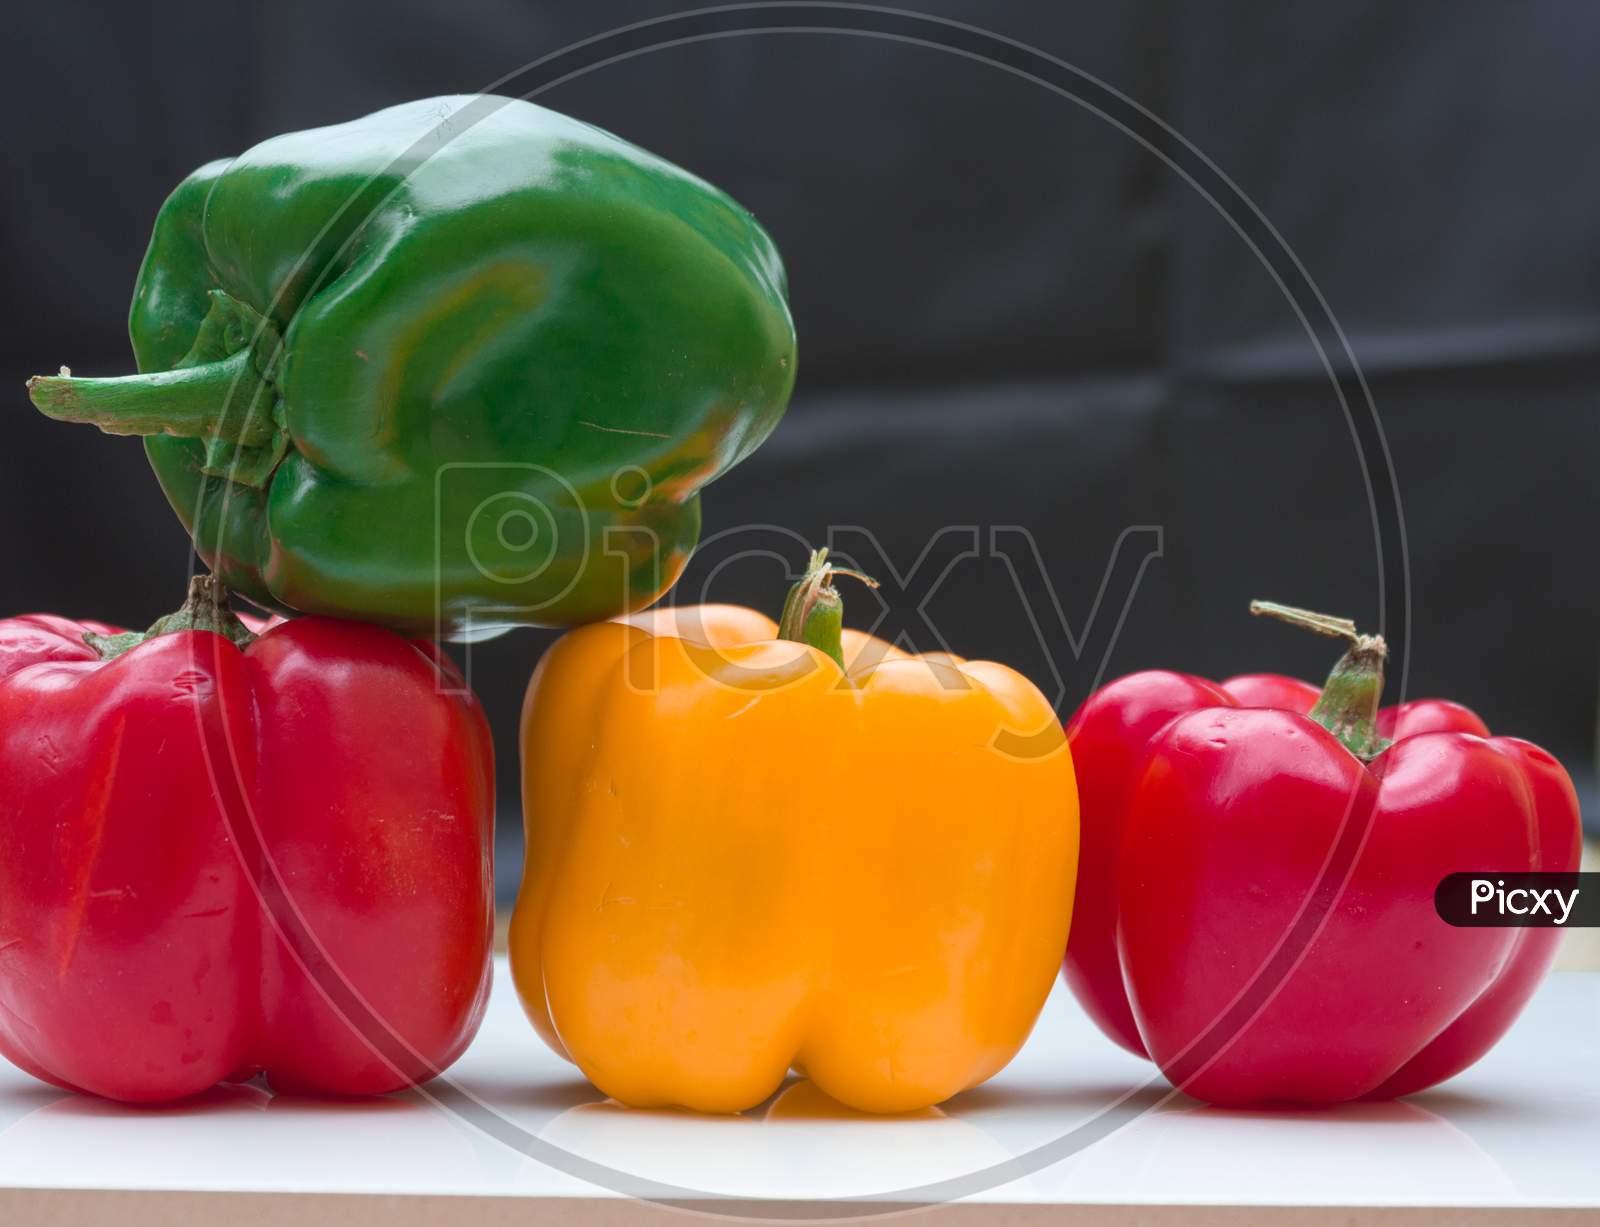 Colorful Bell Peppers arranged in a engaging view.